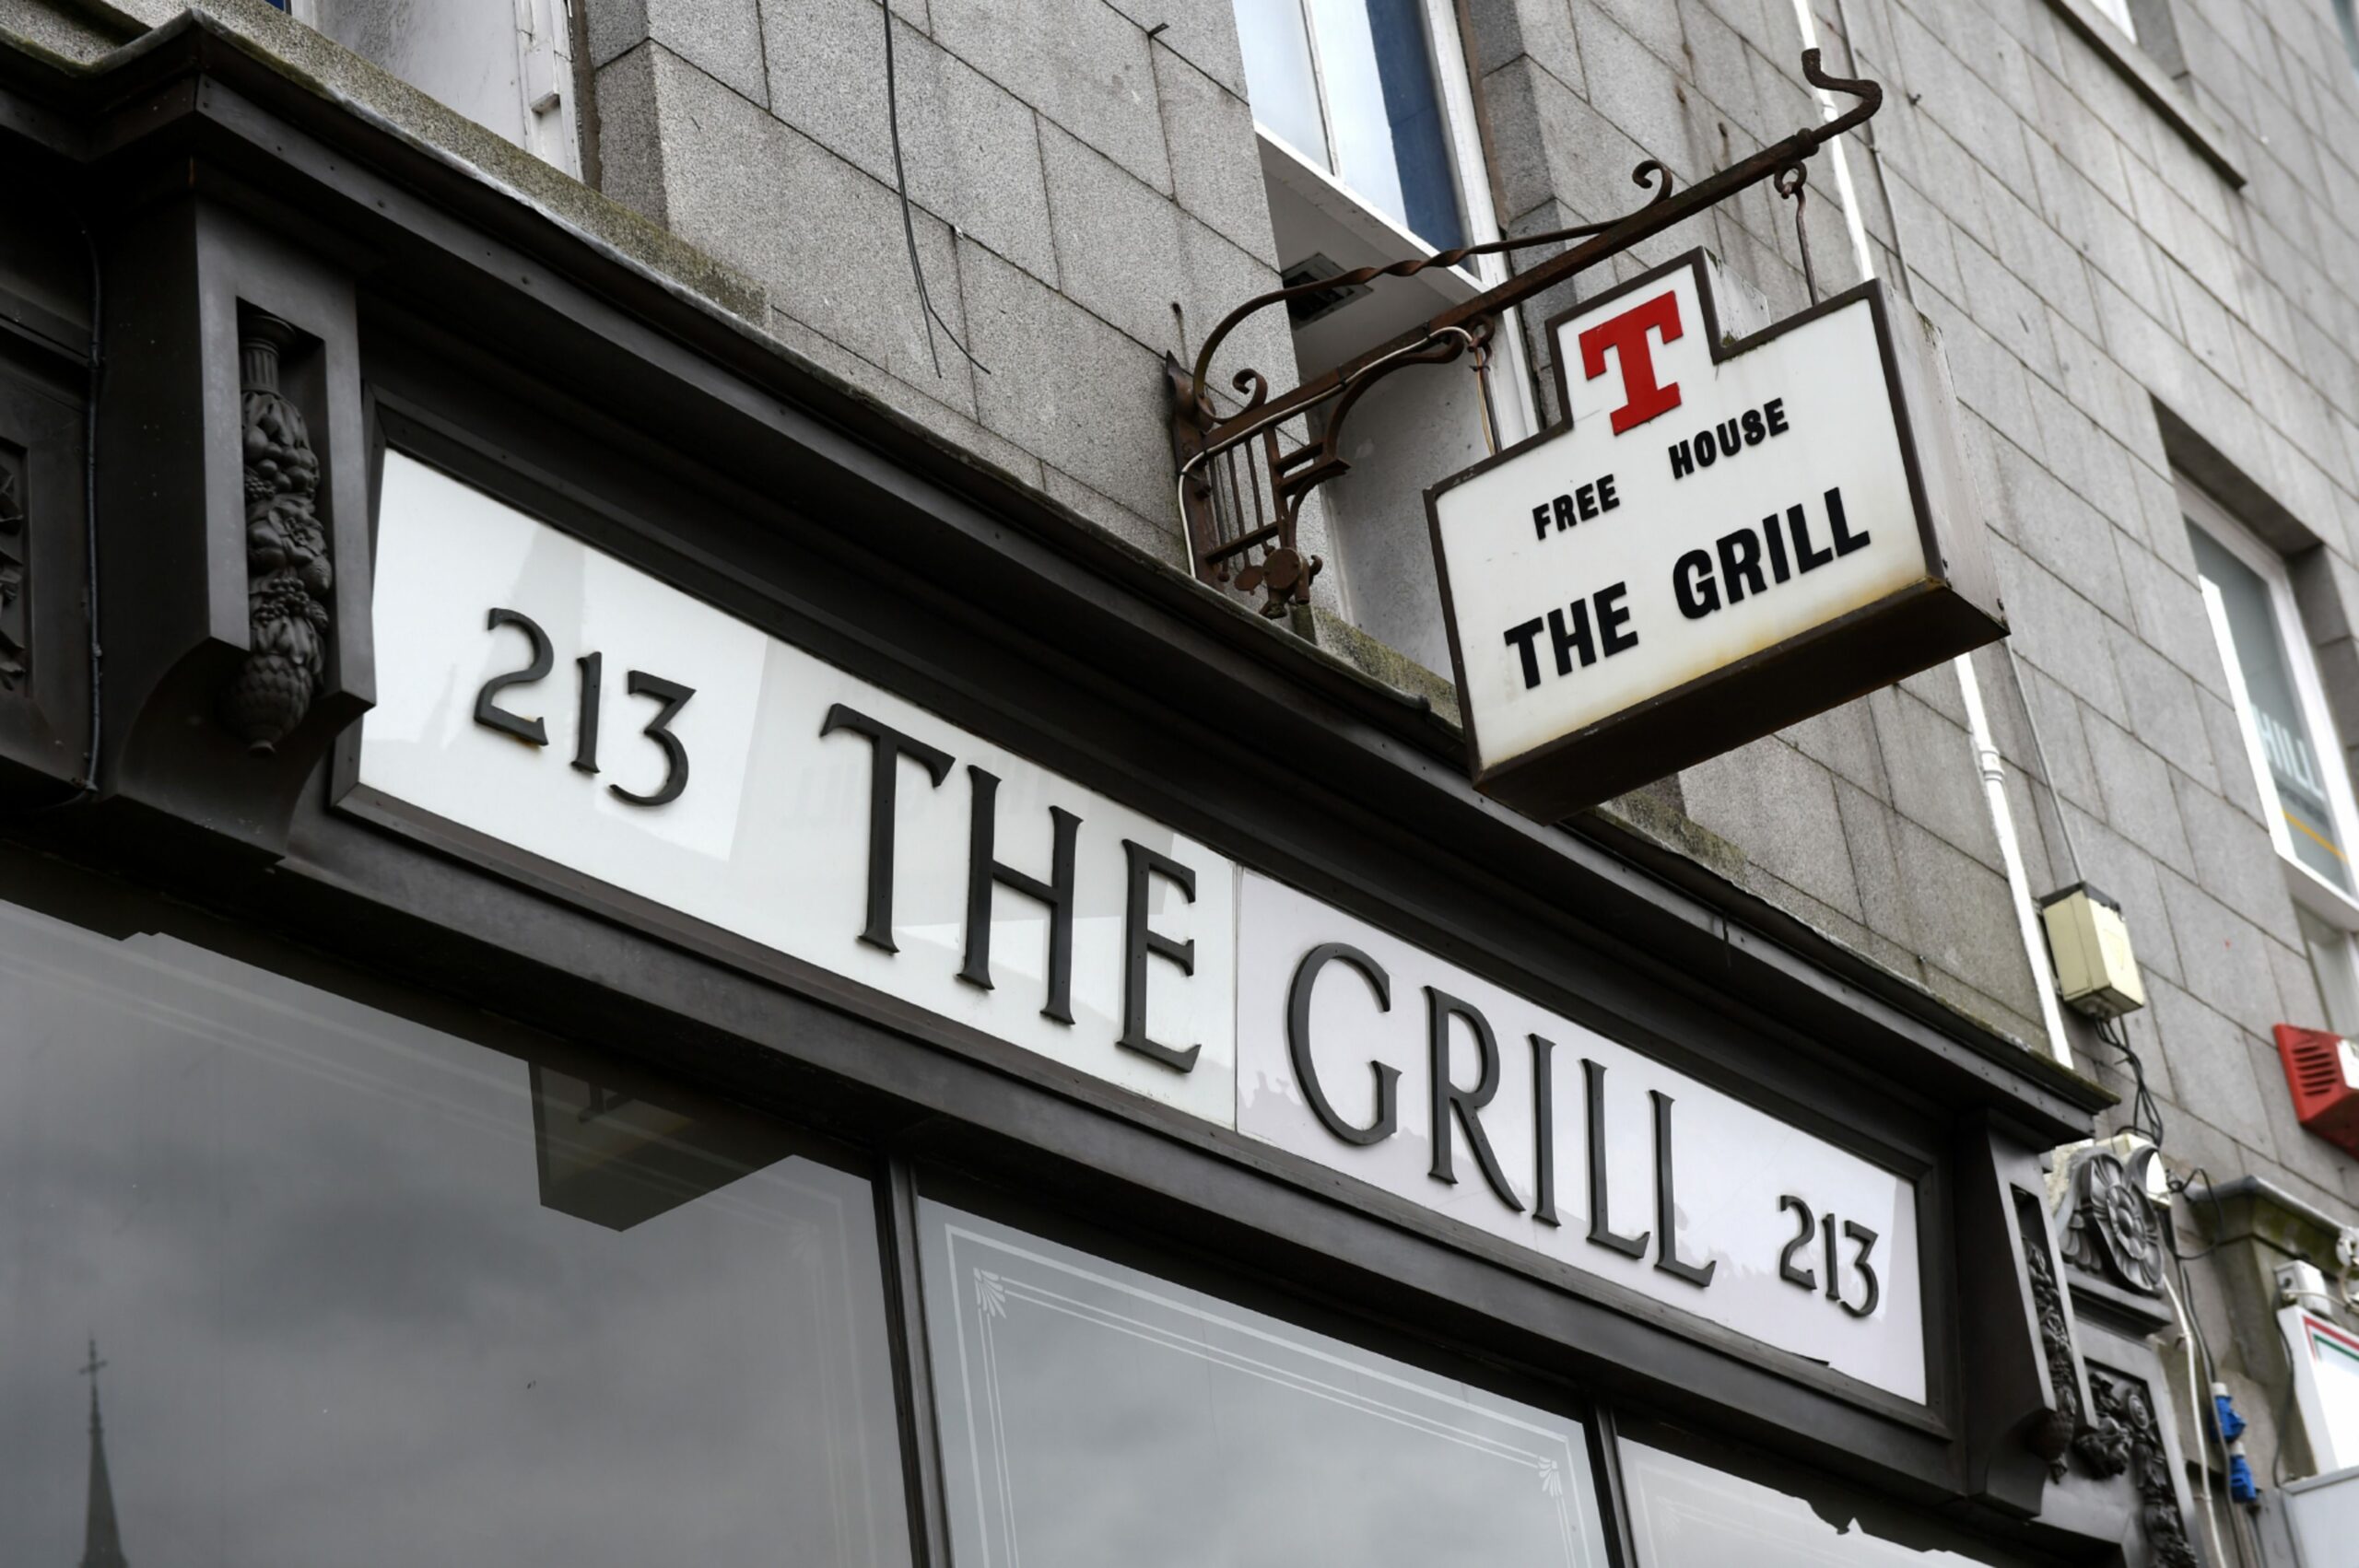 Restaurant sign of The Grill in Union Street, Aberdeen.